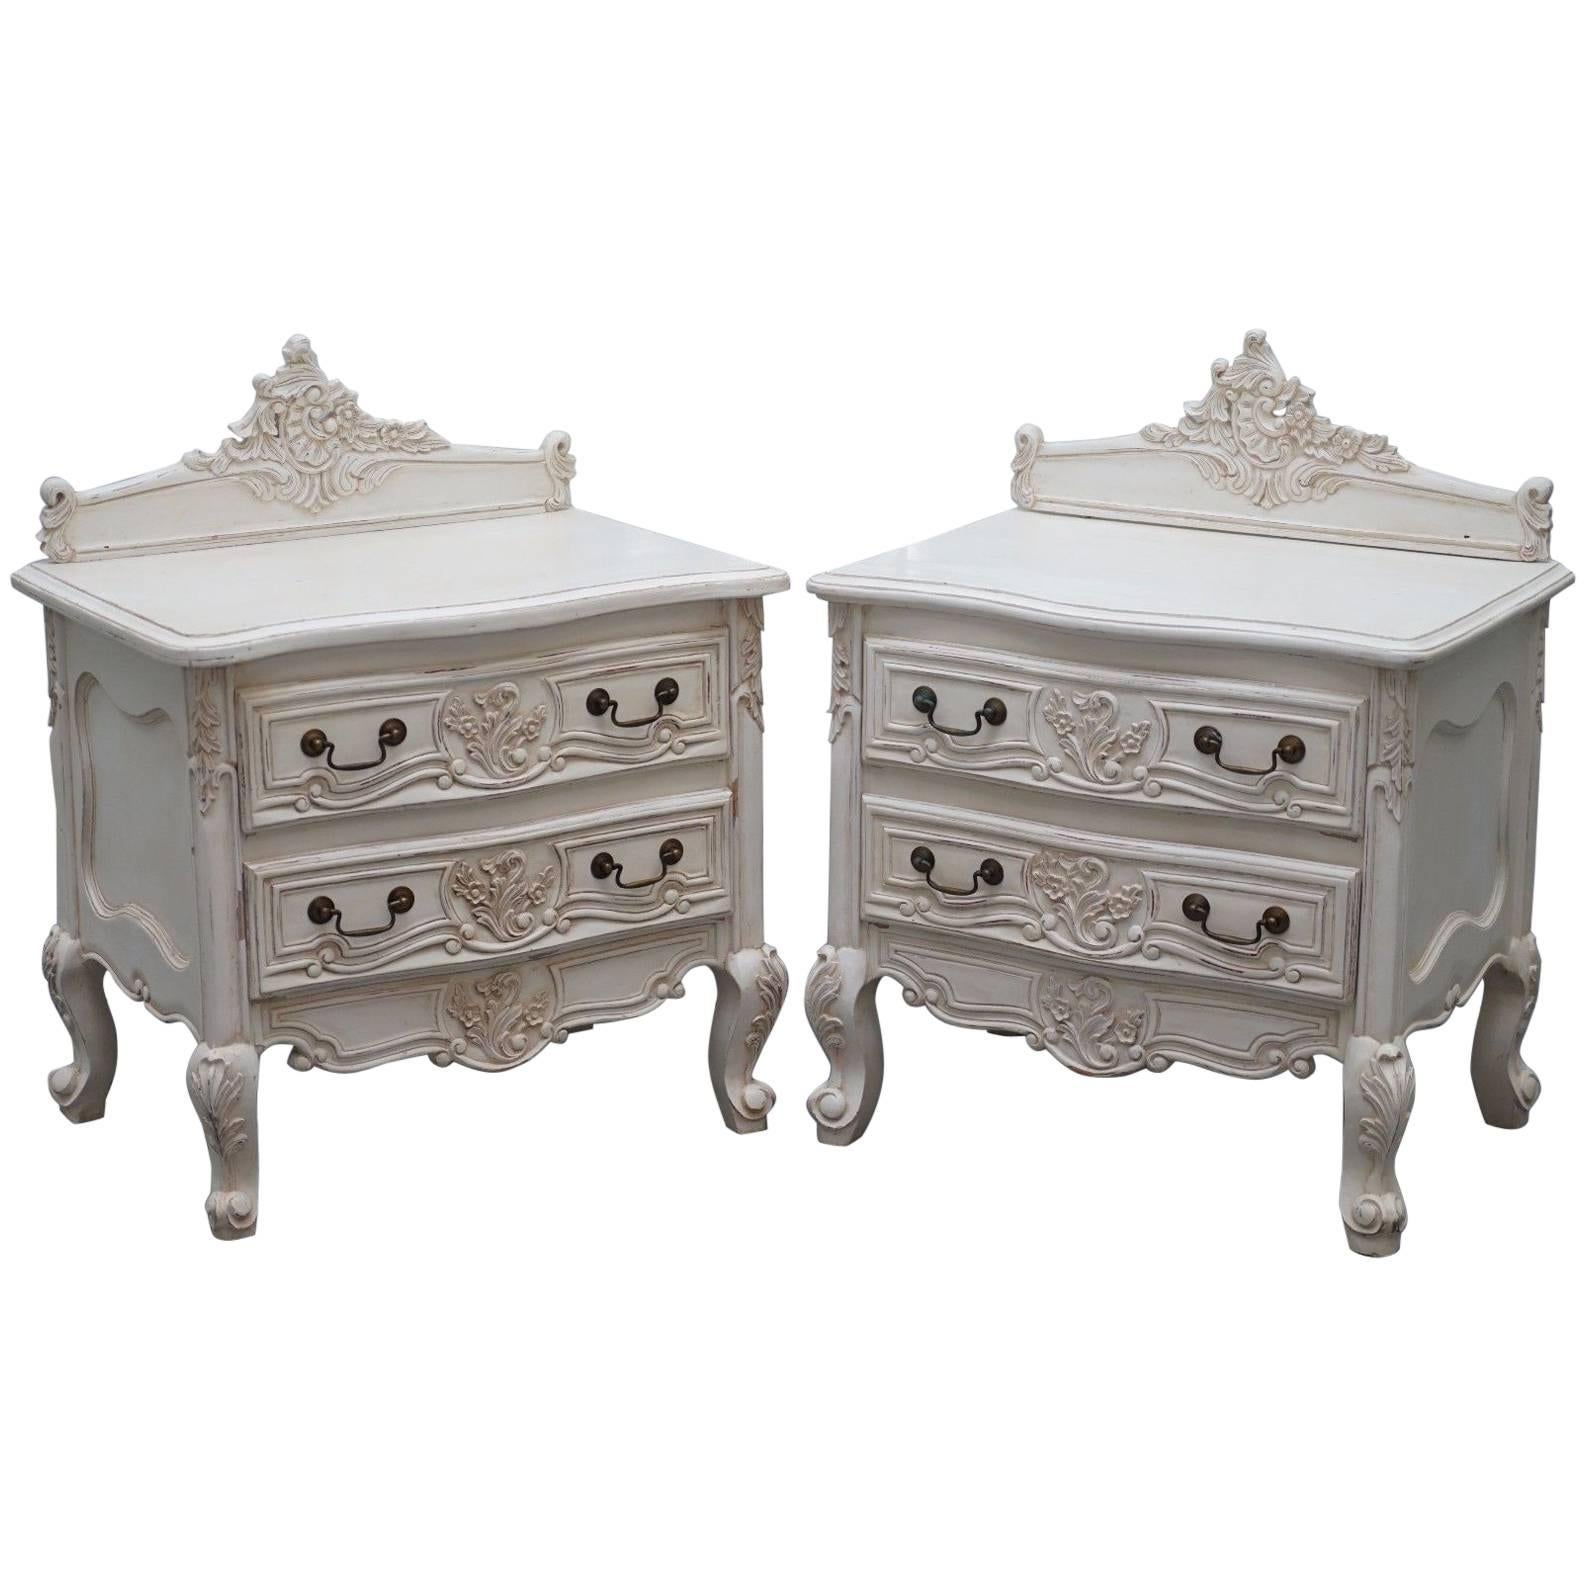 Pair of Hand-Carved French Country over Sized Shabby Chic Bedside Tables Large